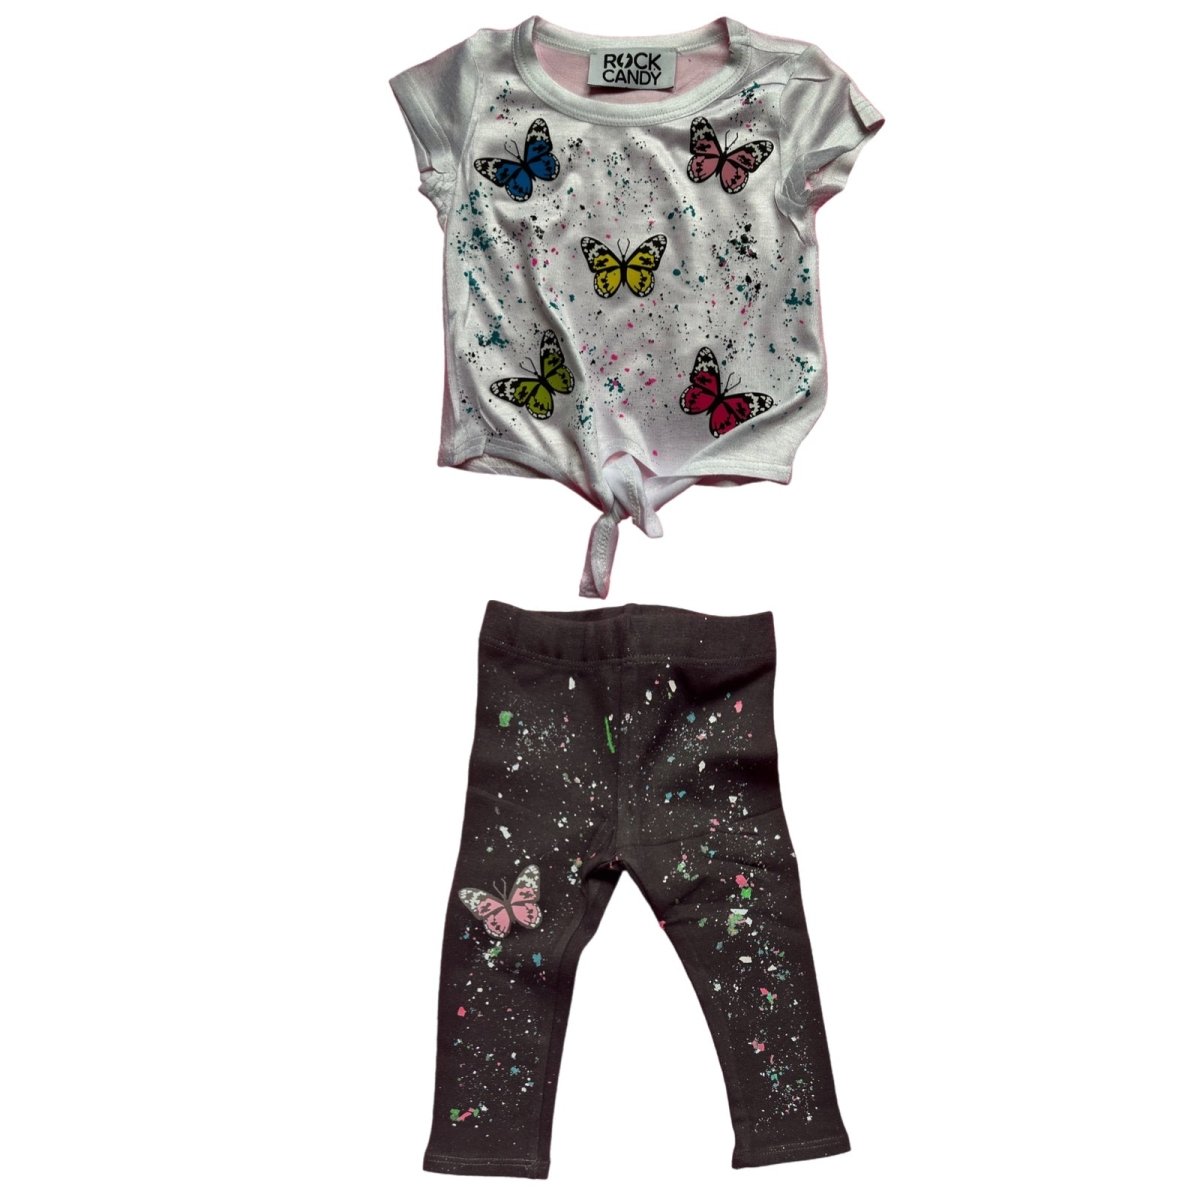 BUTTERFLY SPLATTER TSHIRT AND LEGGINGS SET (PREORDER) - ROCK CANDY